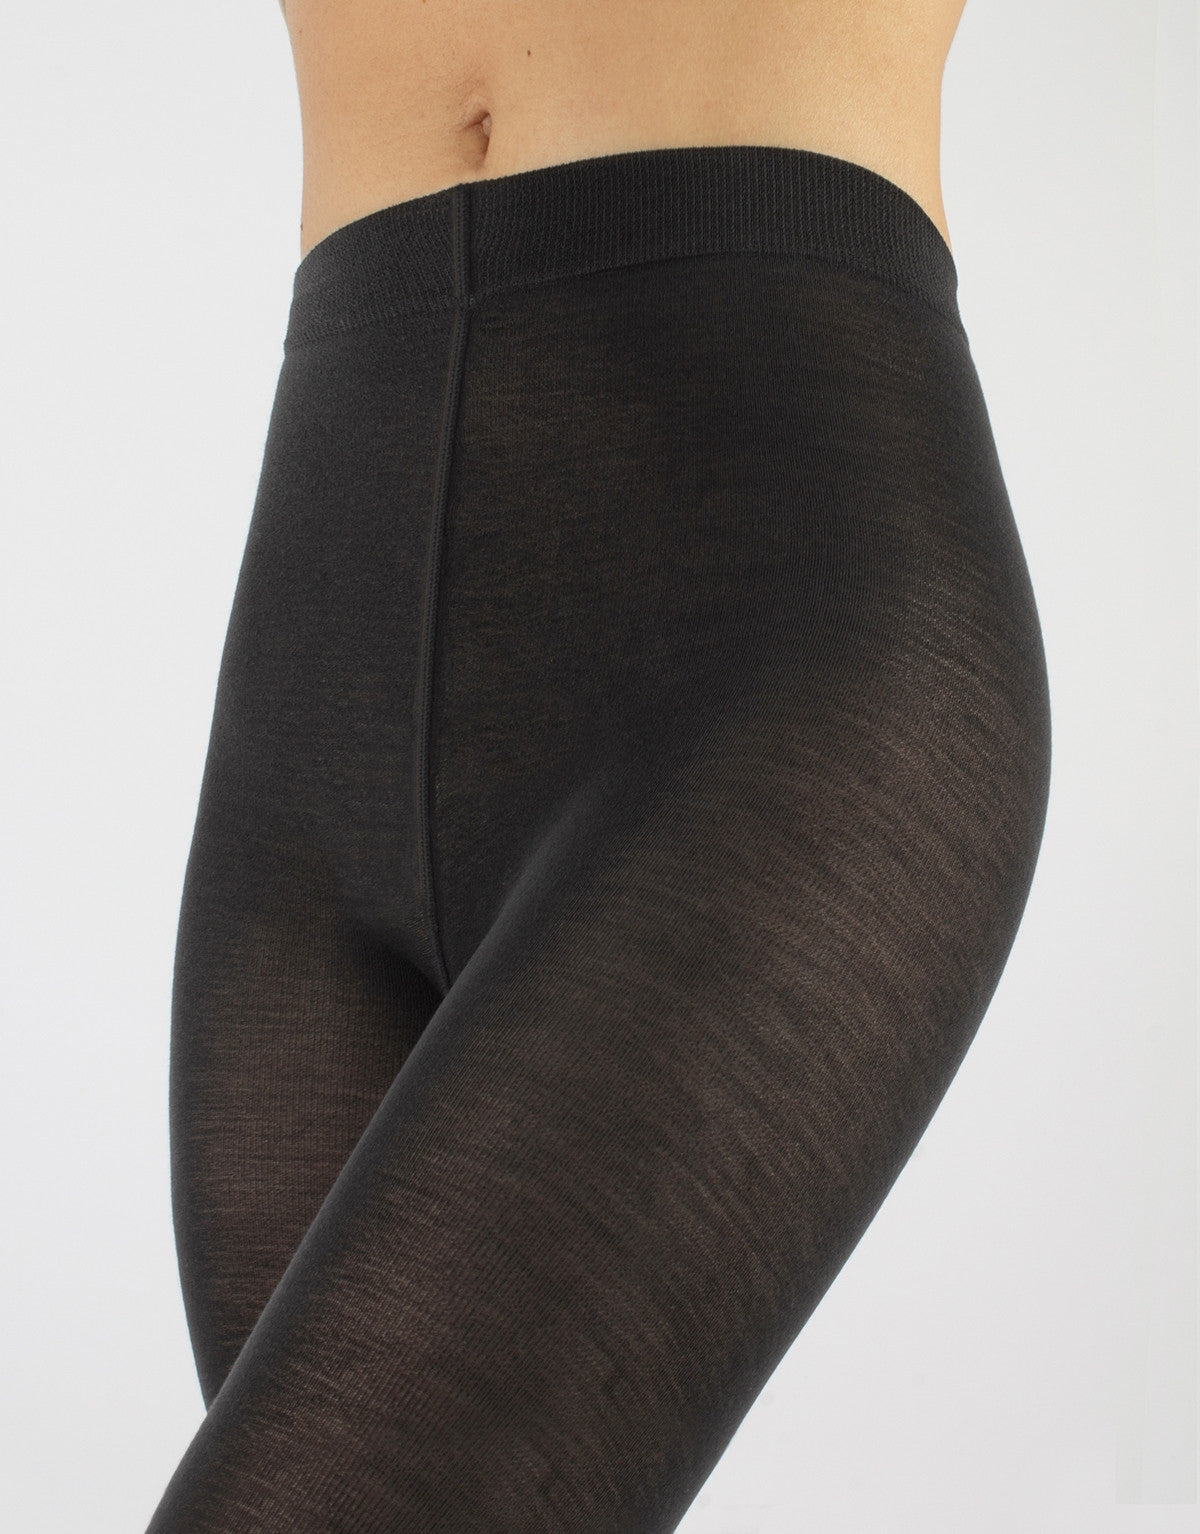 Calzitaly Dark Grey Merino Tights - Light and warm knitted thermal tights with deep waistband and gusset, perfect for cold Winters.